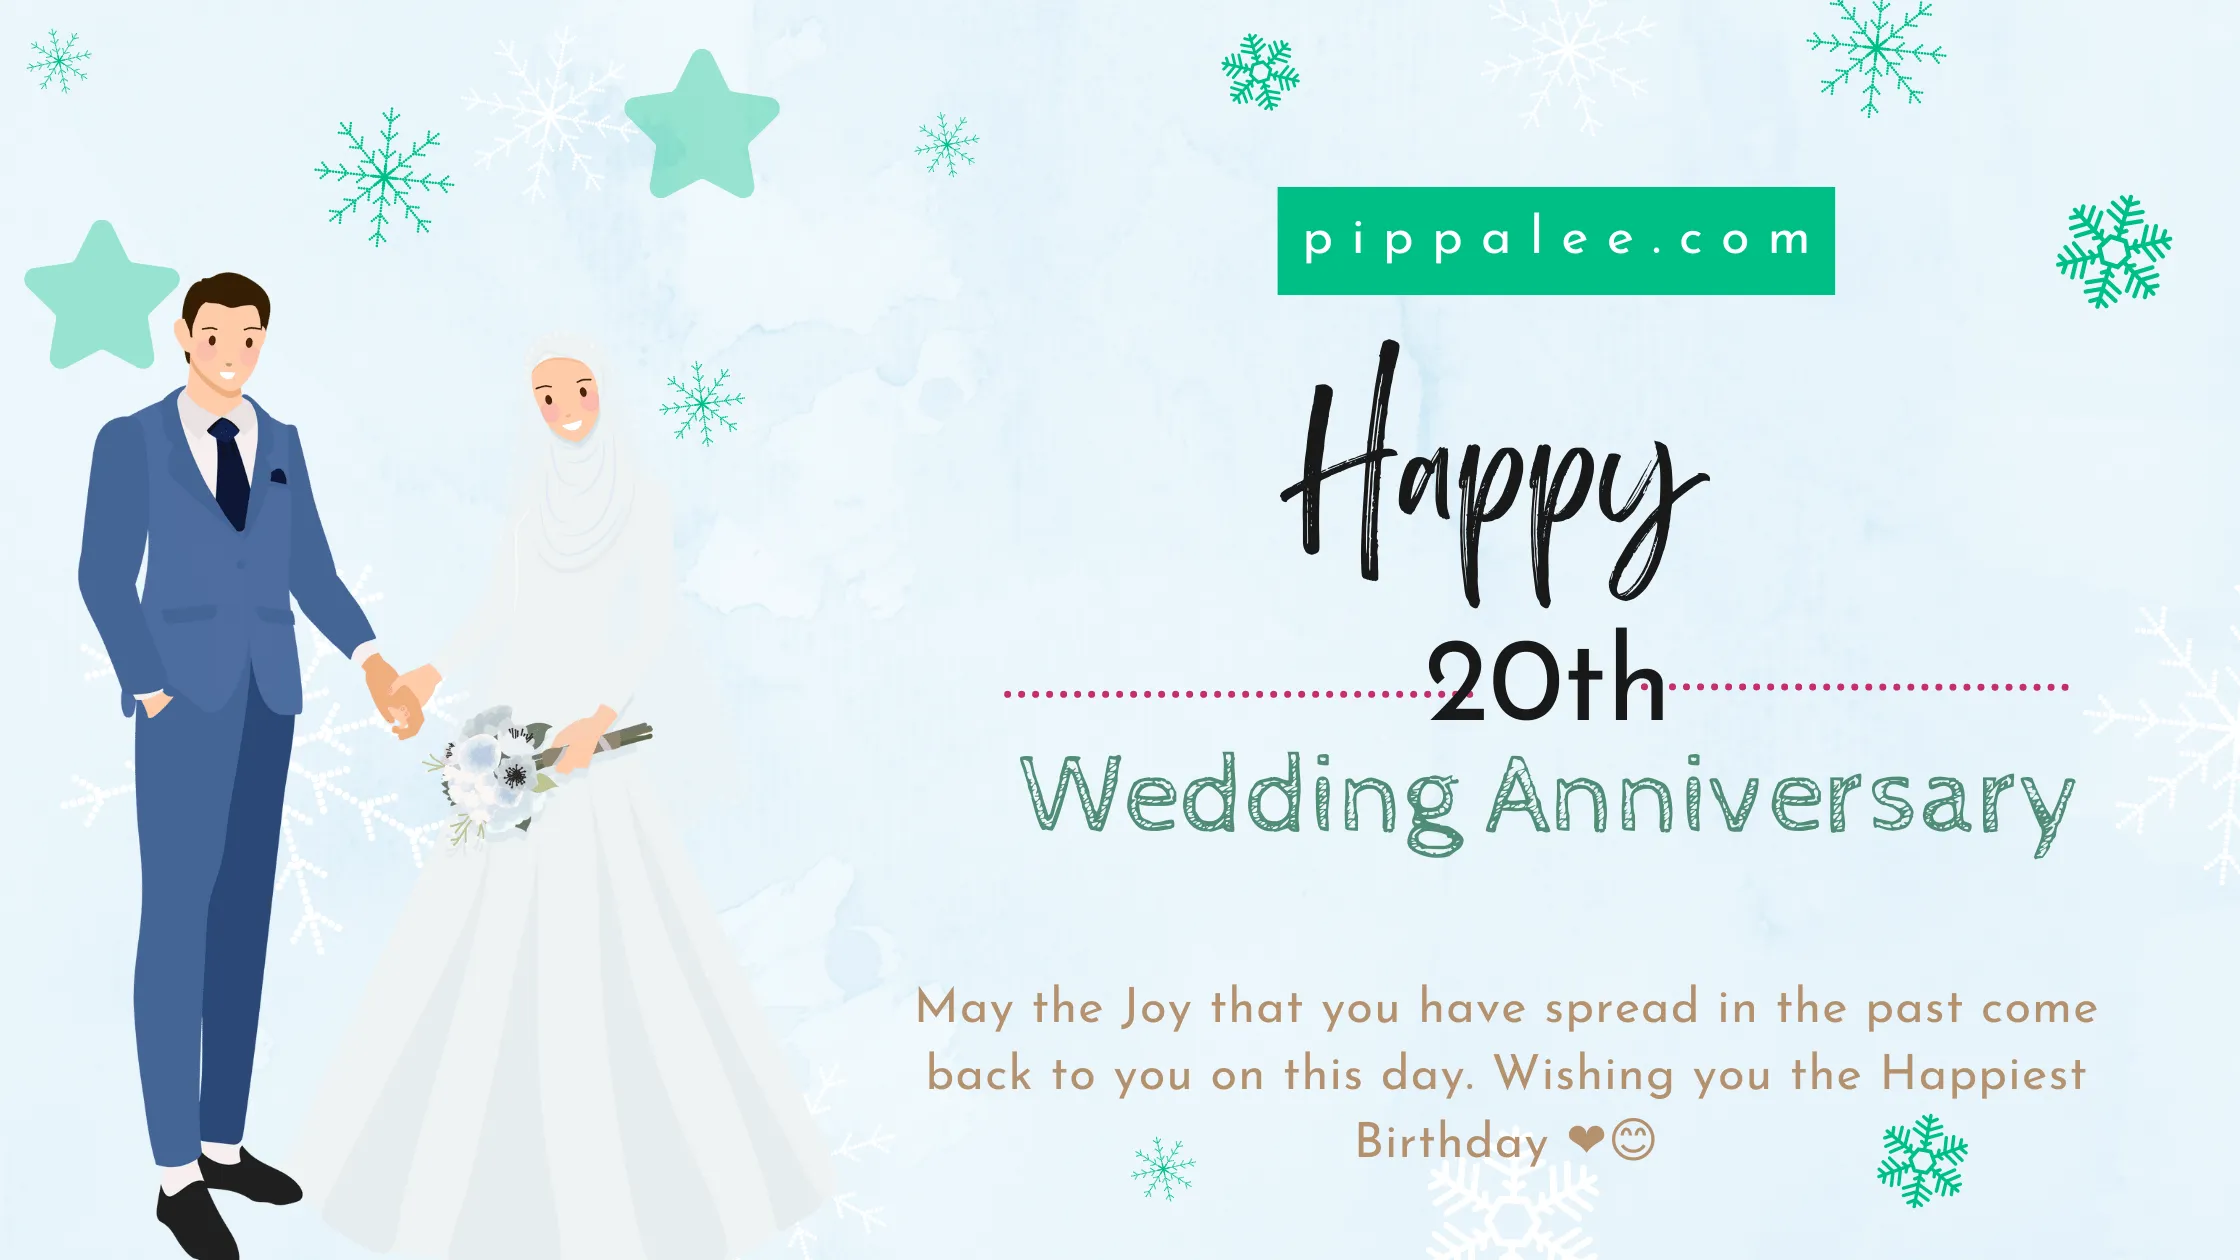 20th Wedding Anniversary - Wishes & Messages